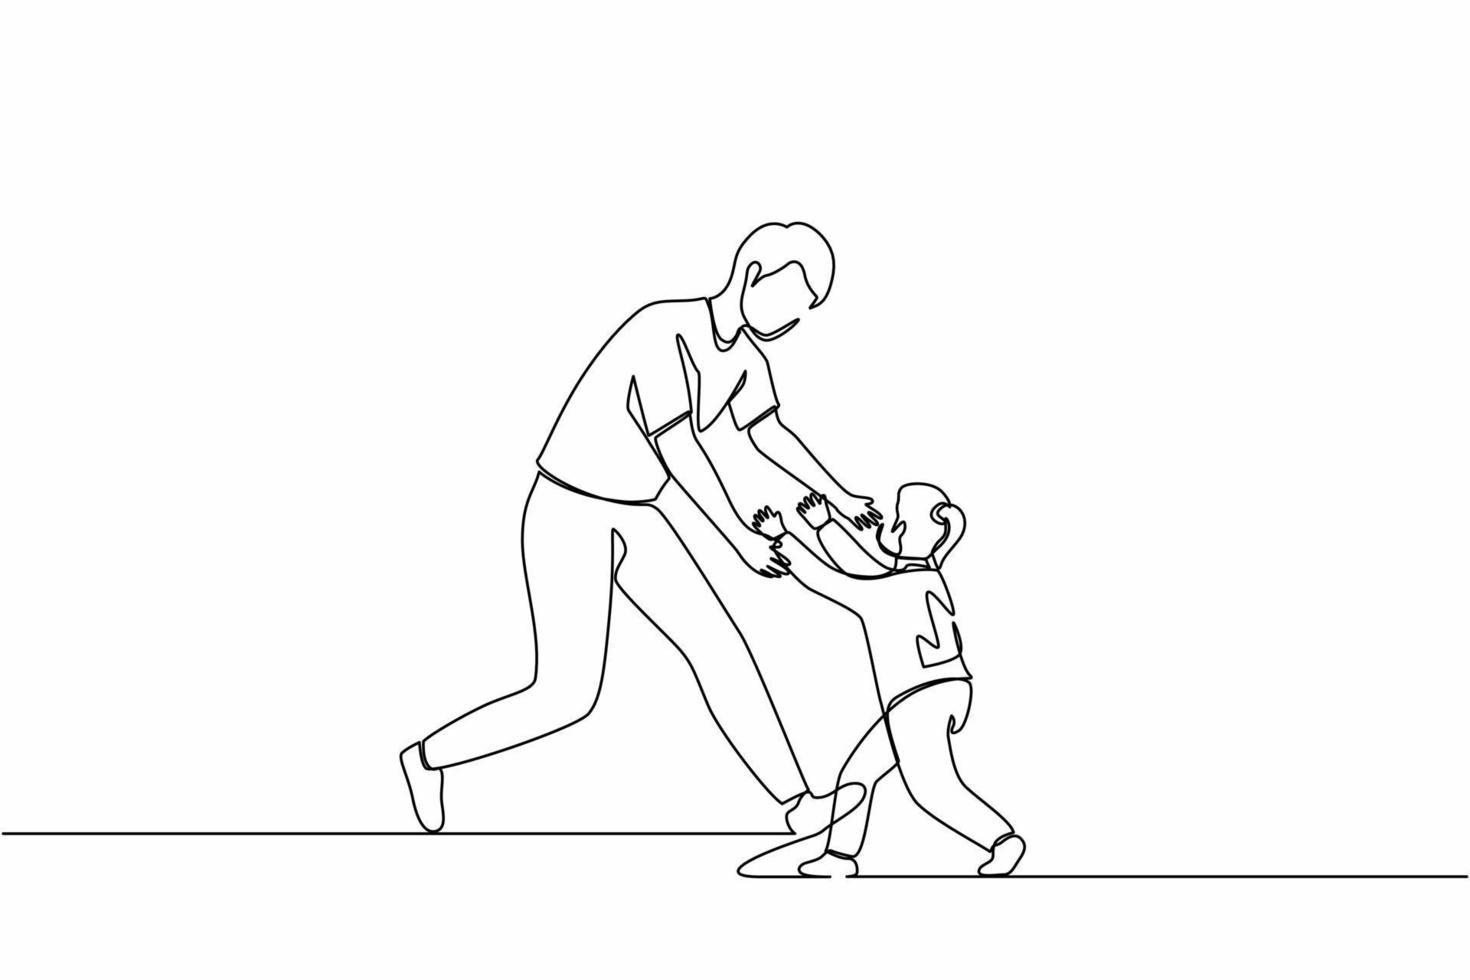 Single one line drawing joyful little daughter running to dad for family hug. Happy little girl meeting man with love. Family, Fathers day, childhood concept. Continuous line design graphic vector